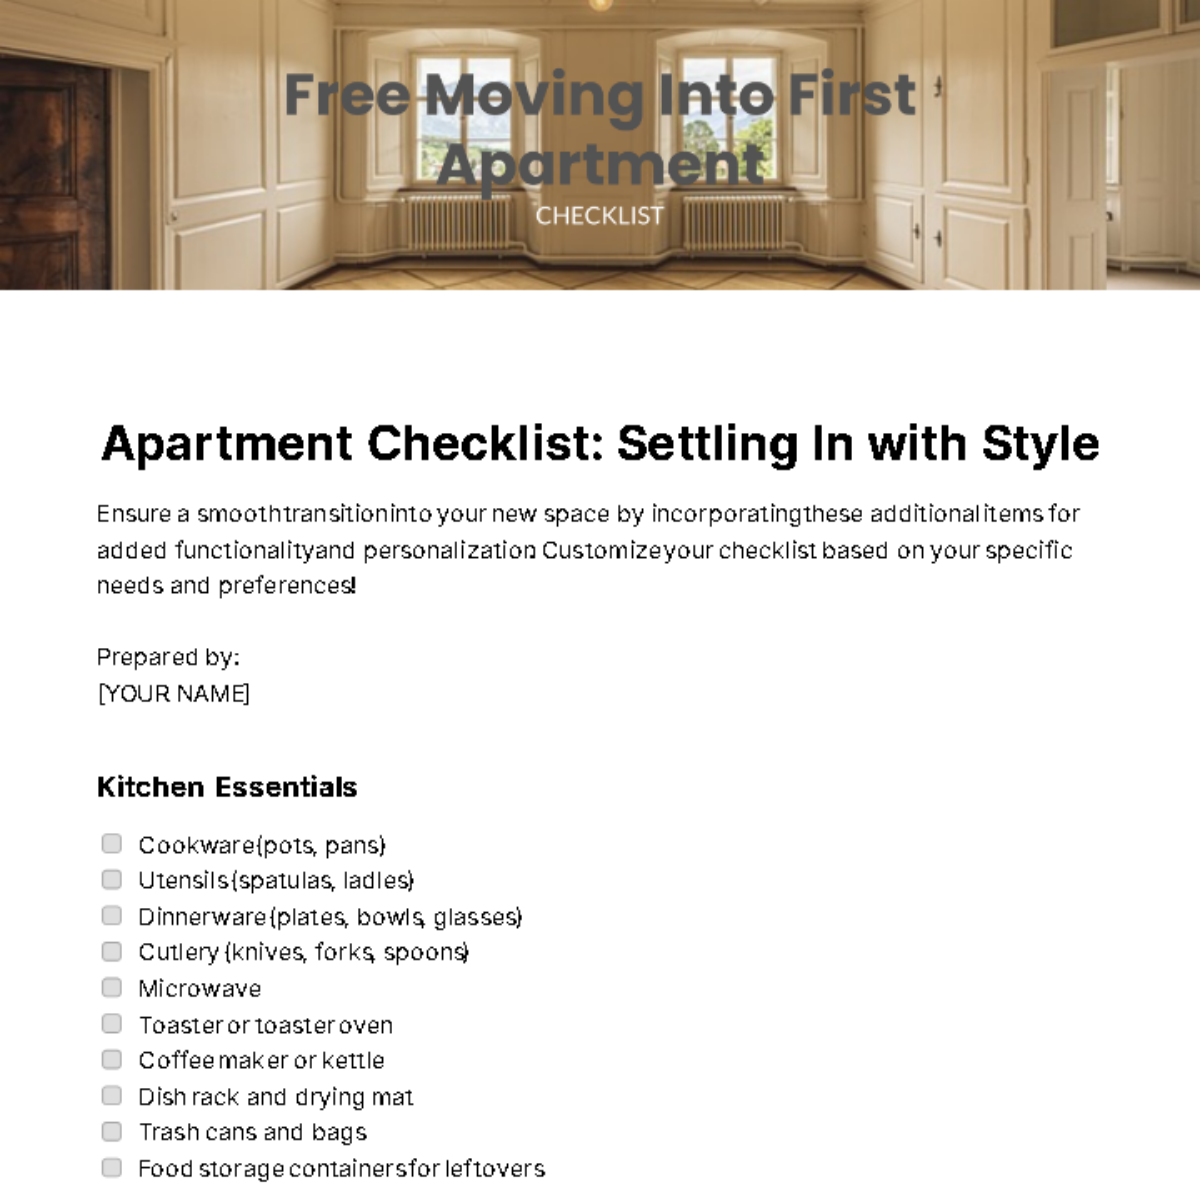 Free Moving Into First Apartment Checklist Template